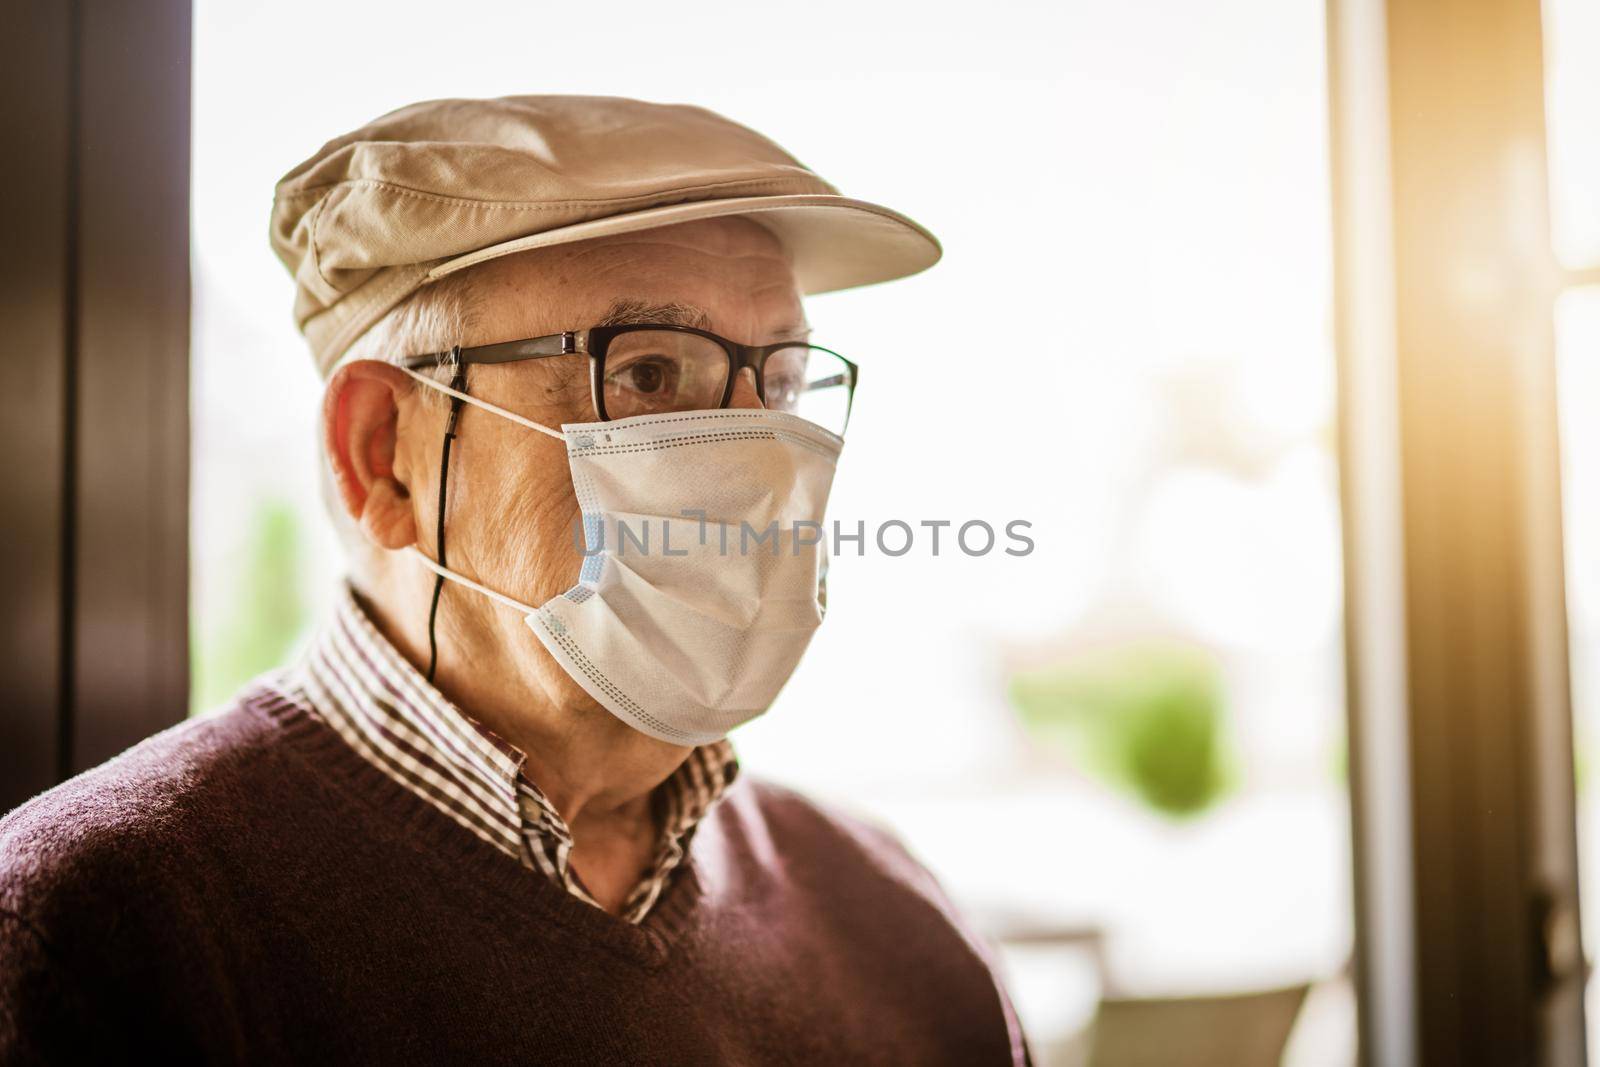 Indoor close up portrait of senior man who is wearing face protection mask. Covid 19 prevention concept.